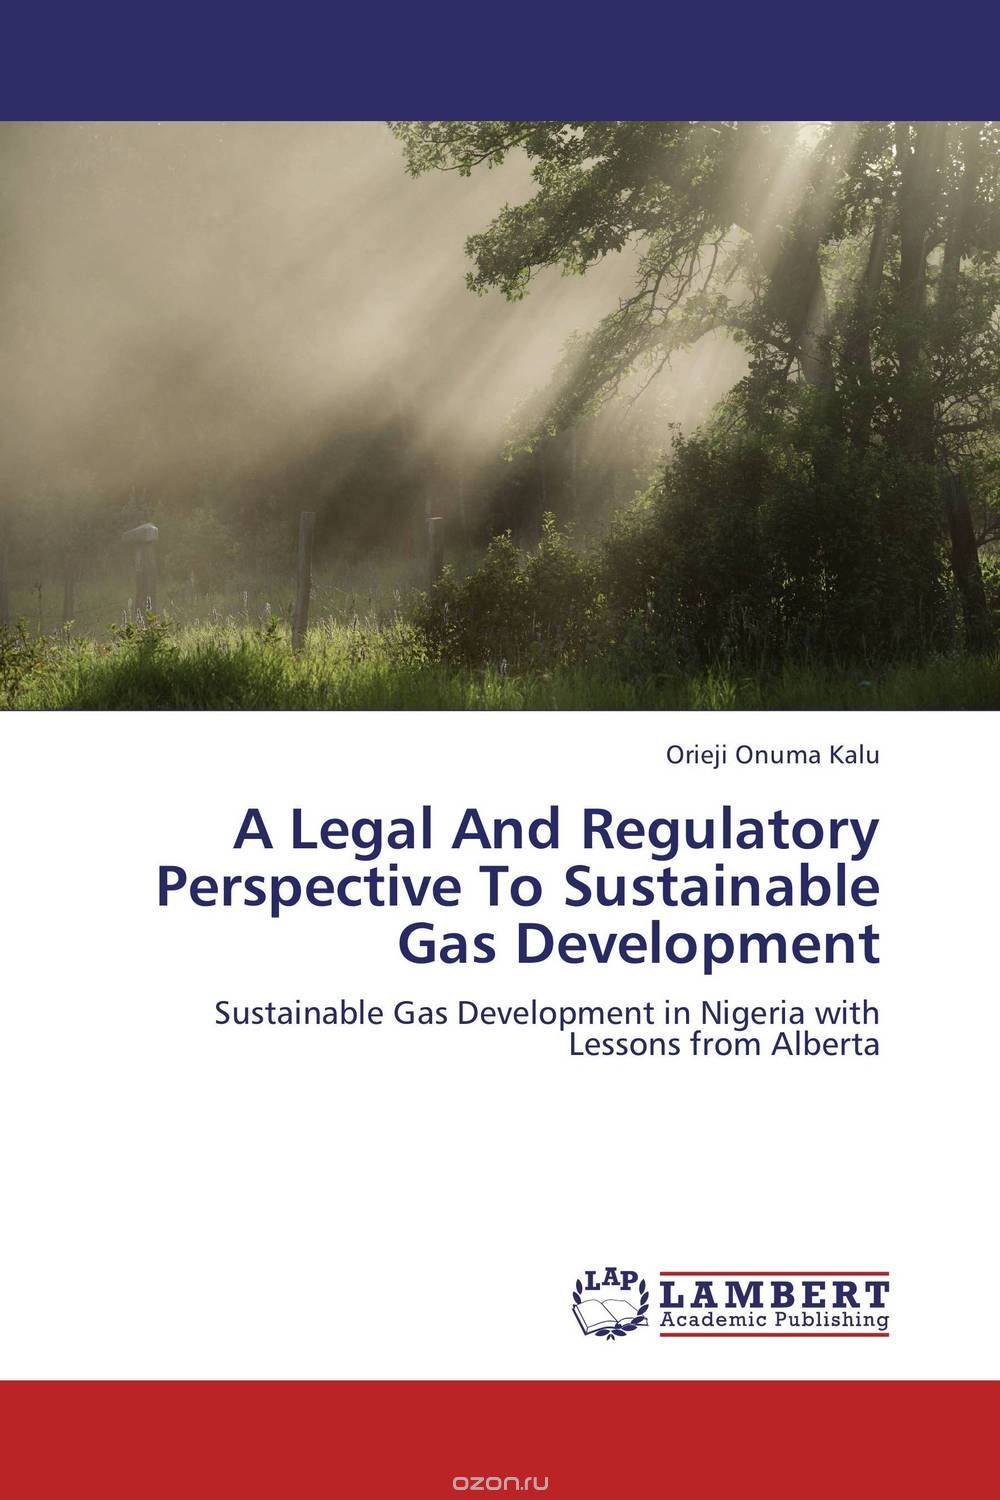 A Legal And Regulatory Perspective To Sustainable Gas Development